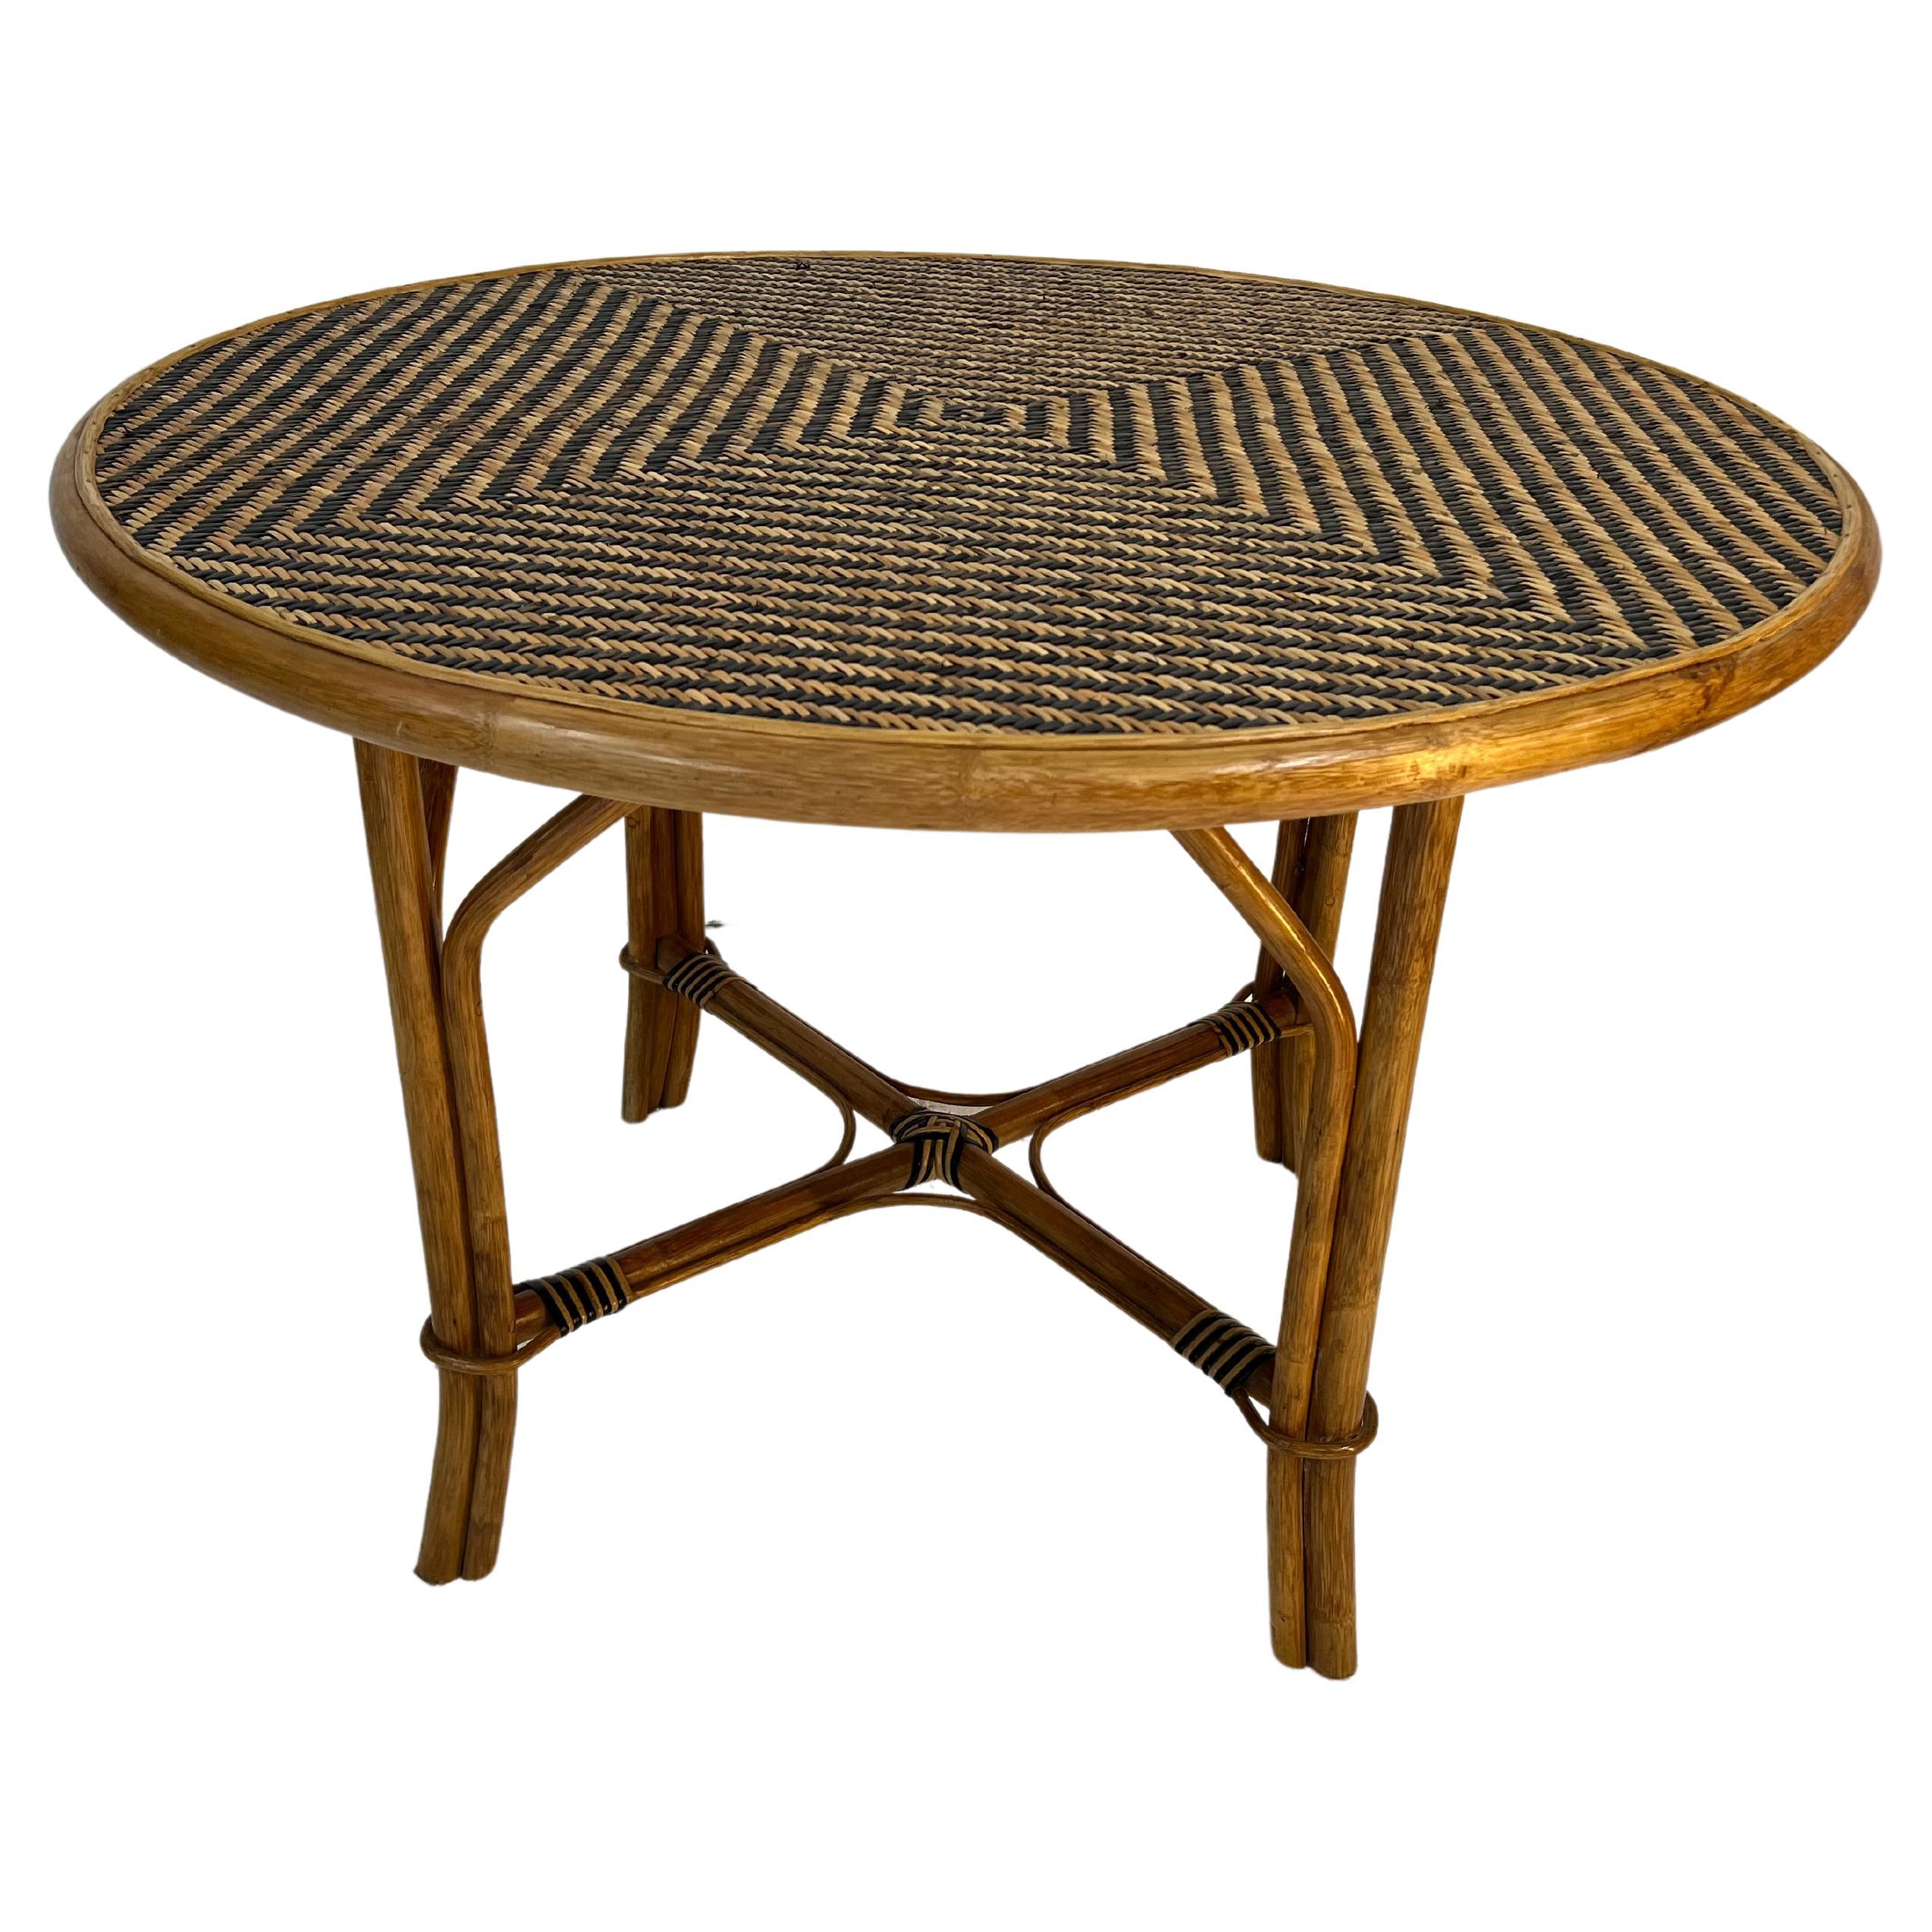 Two Tone Wicker Table 1950s Vintage For Sale